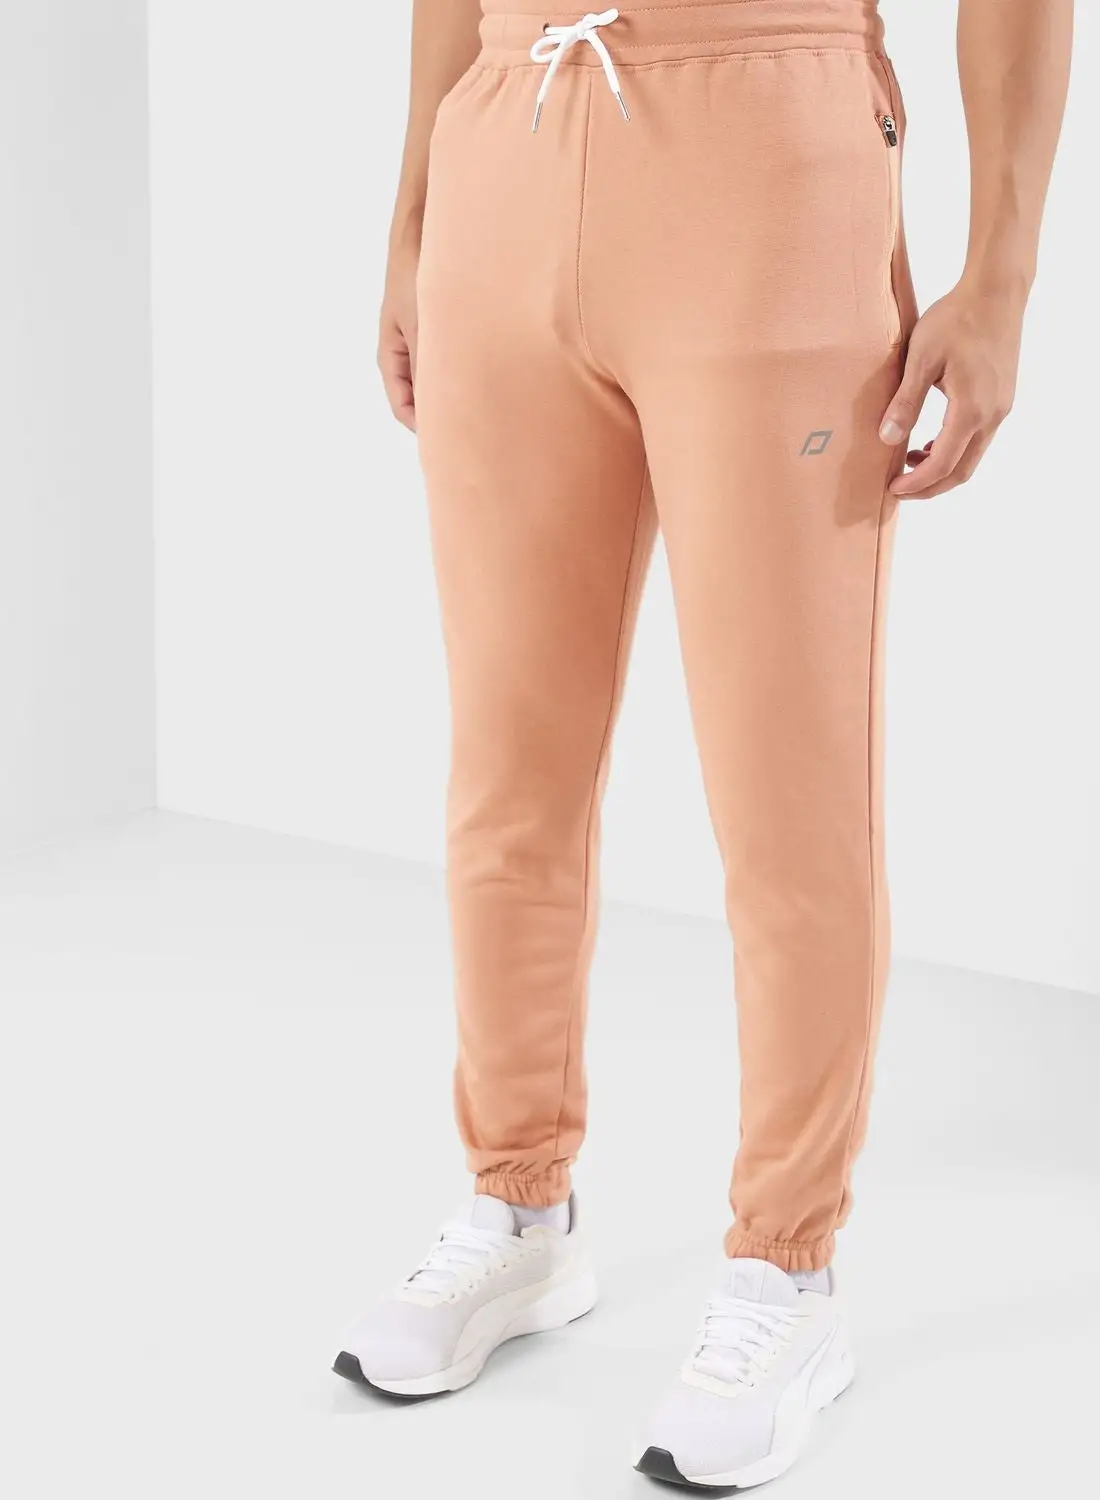 FRWD Athleisure Essential Joggers